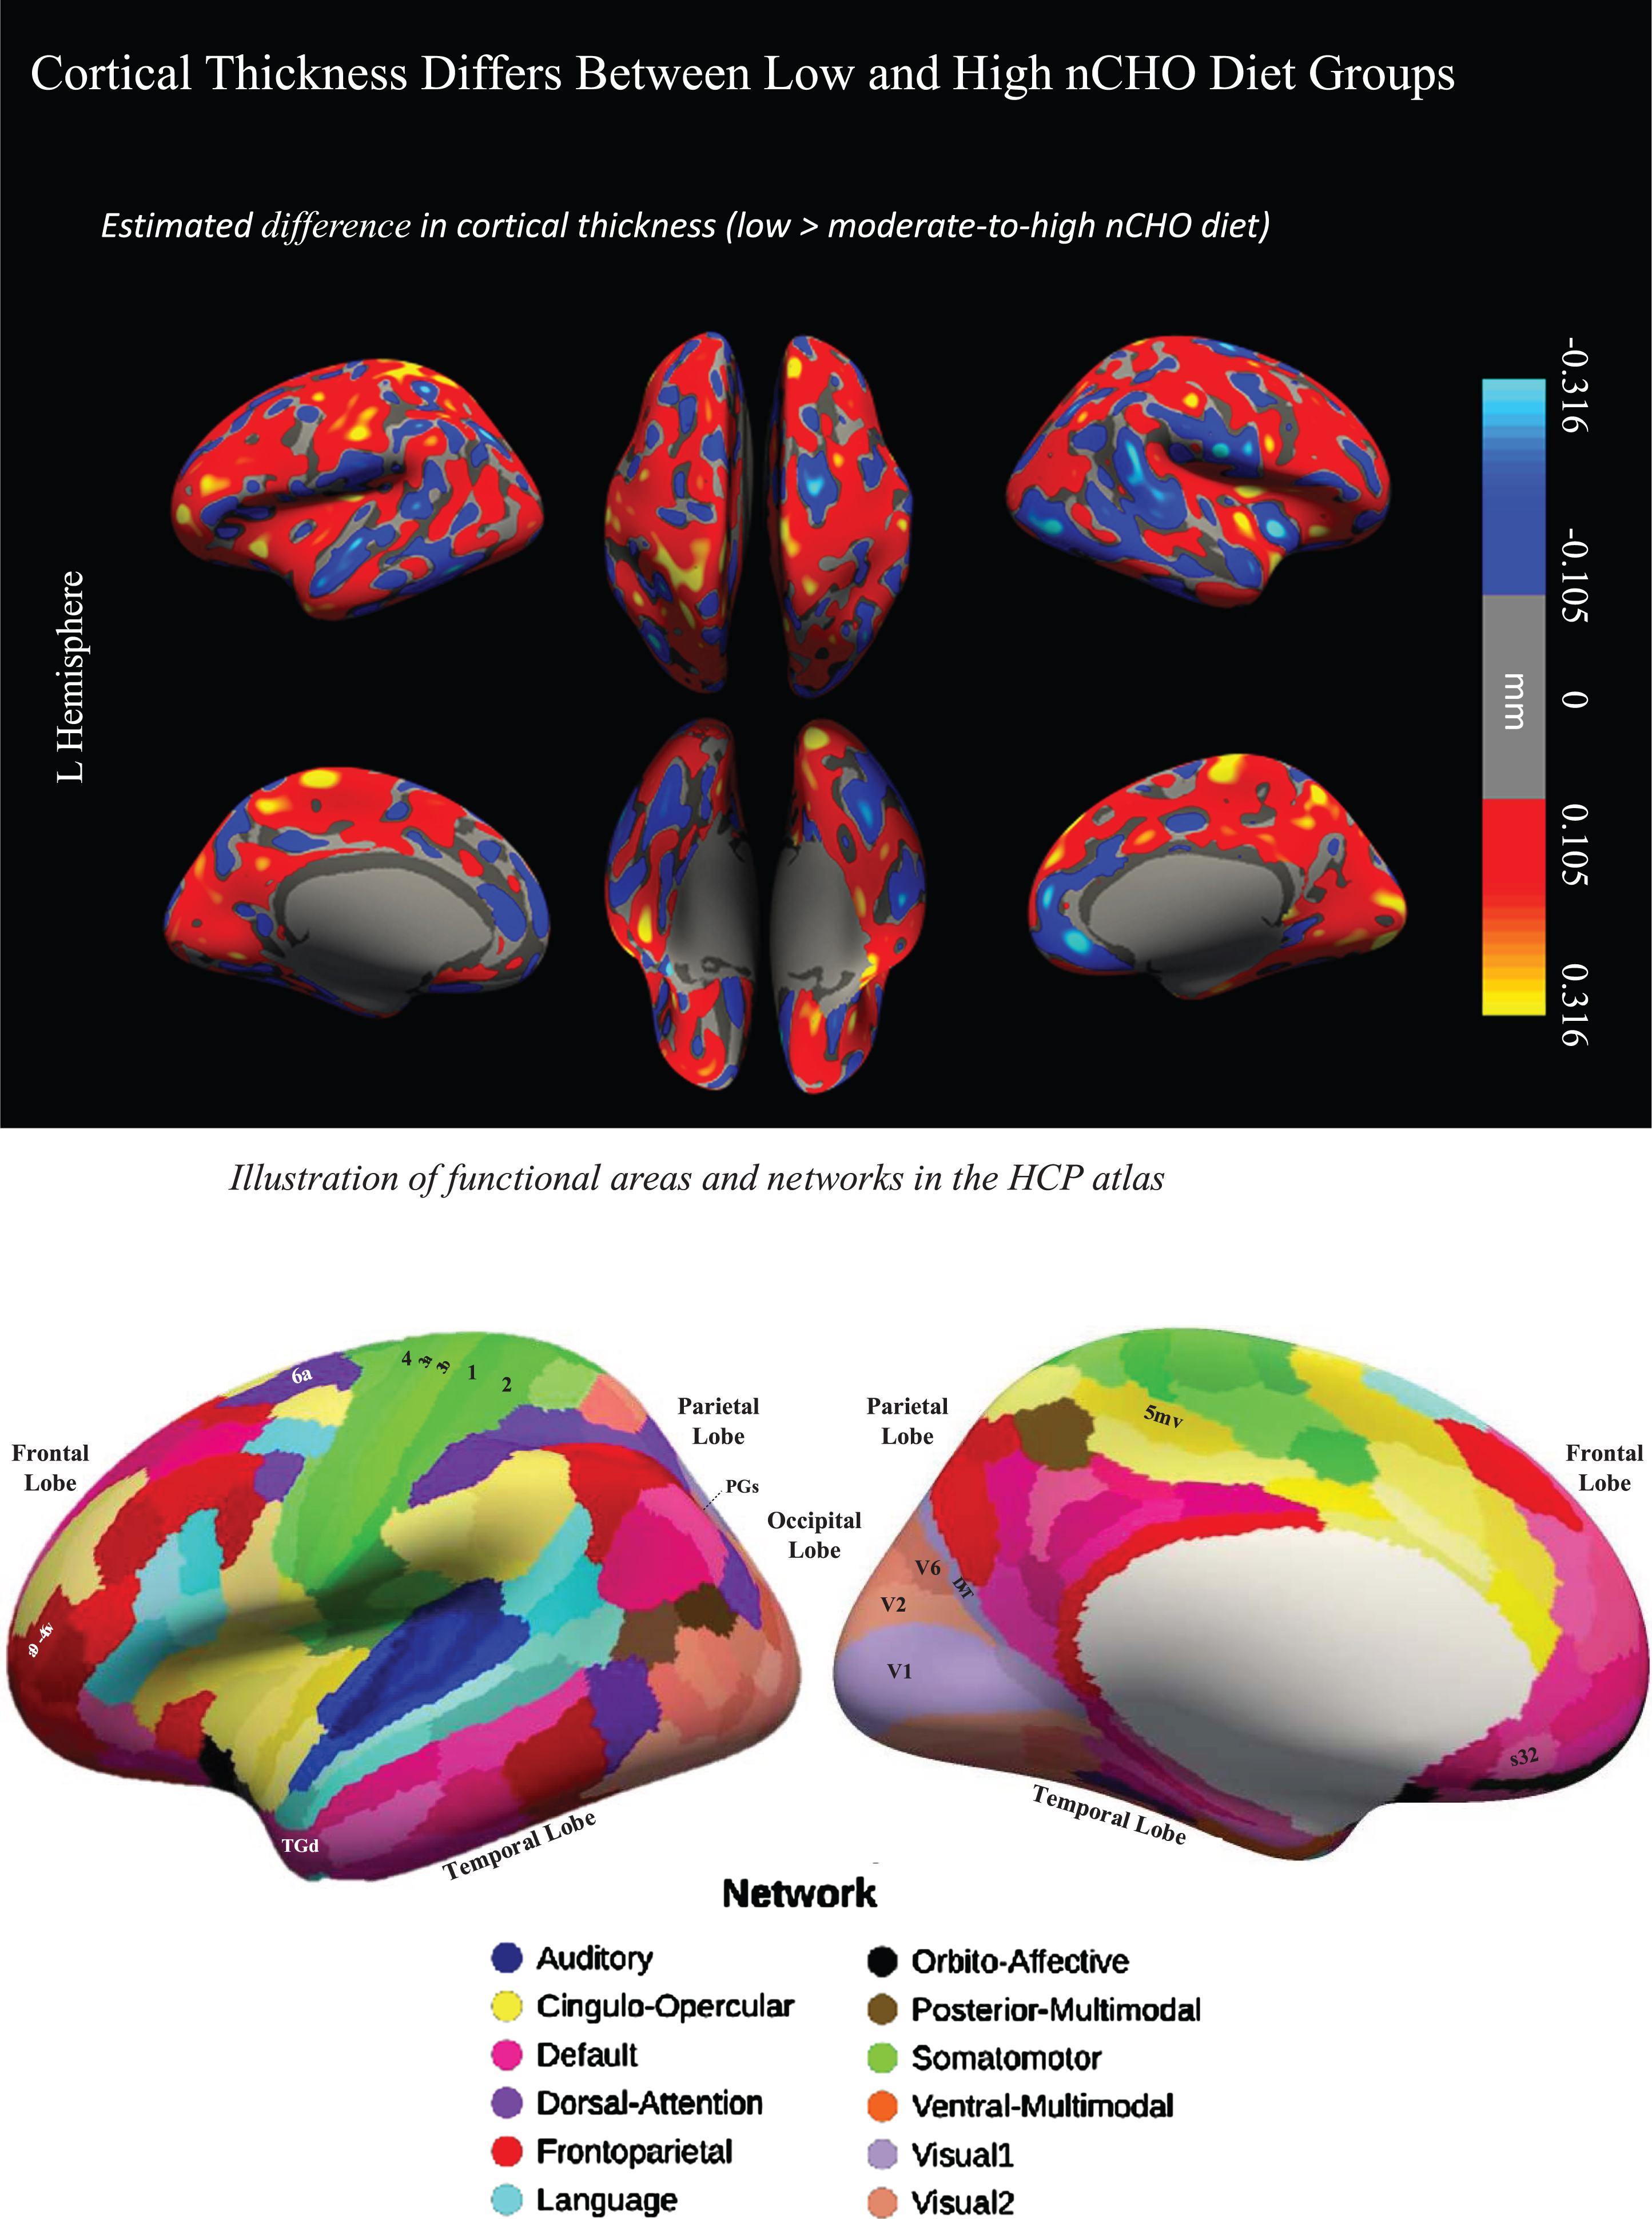 Difference in cortical thickness between lower –higher nCHO diet groups and anatomical reference. Top of figure shows the cortical surface-wide map of the difference in cortical thickness between lower and higher nCHO diet groups. Warmer colors represent voxels with larger thickness in the lower than higher nCHO diet group. Cooler colors represent voxels with larger thickness in the higher than lower nCHO diet group. Bottom of figure shows the Human Connectome Project Multi-Modal Parcellation (HCP-MMP) Atlas.